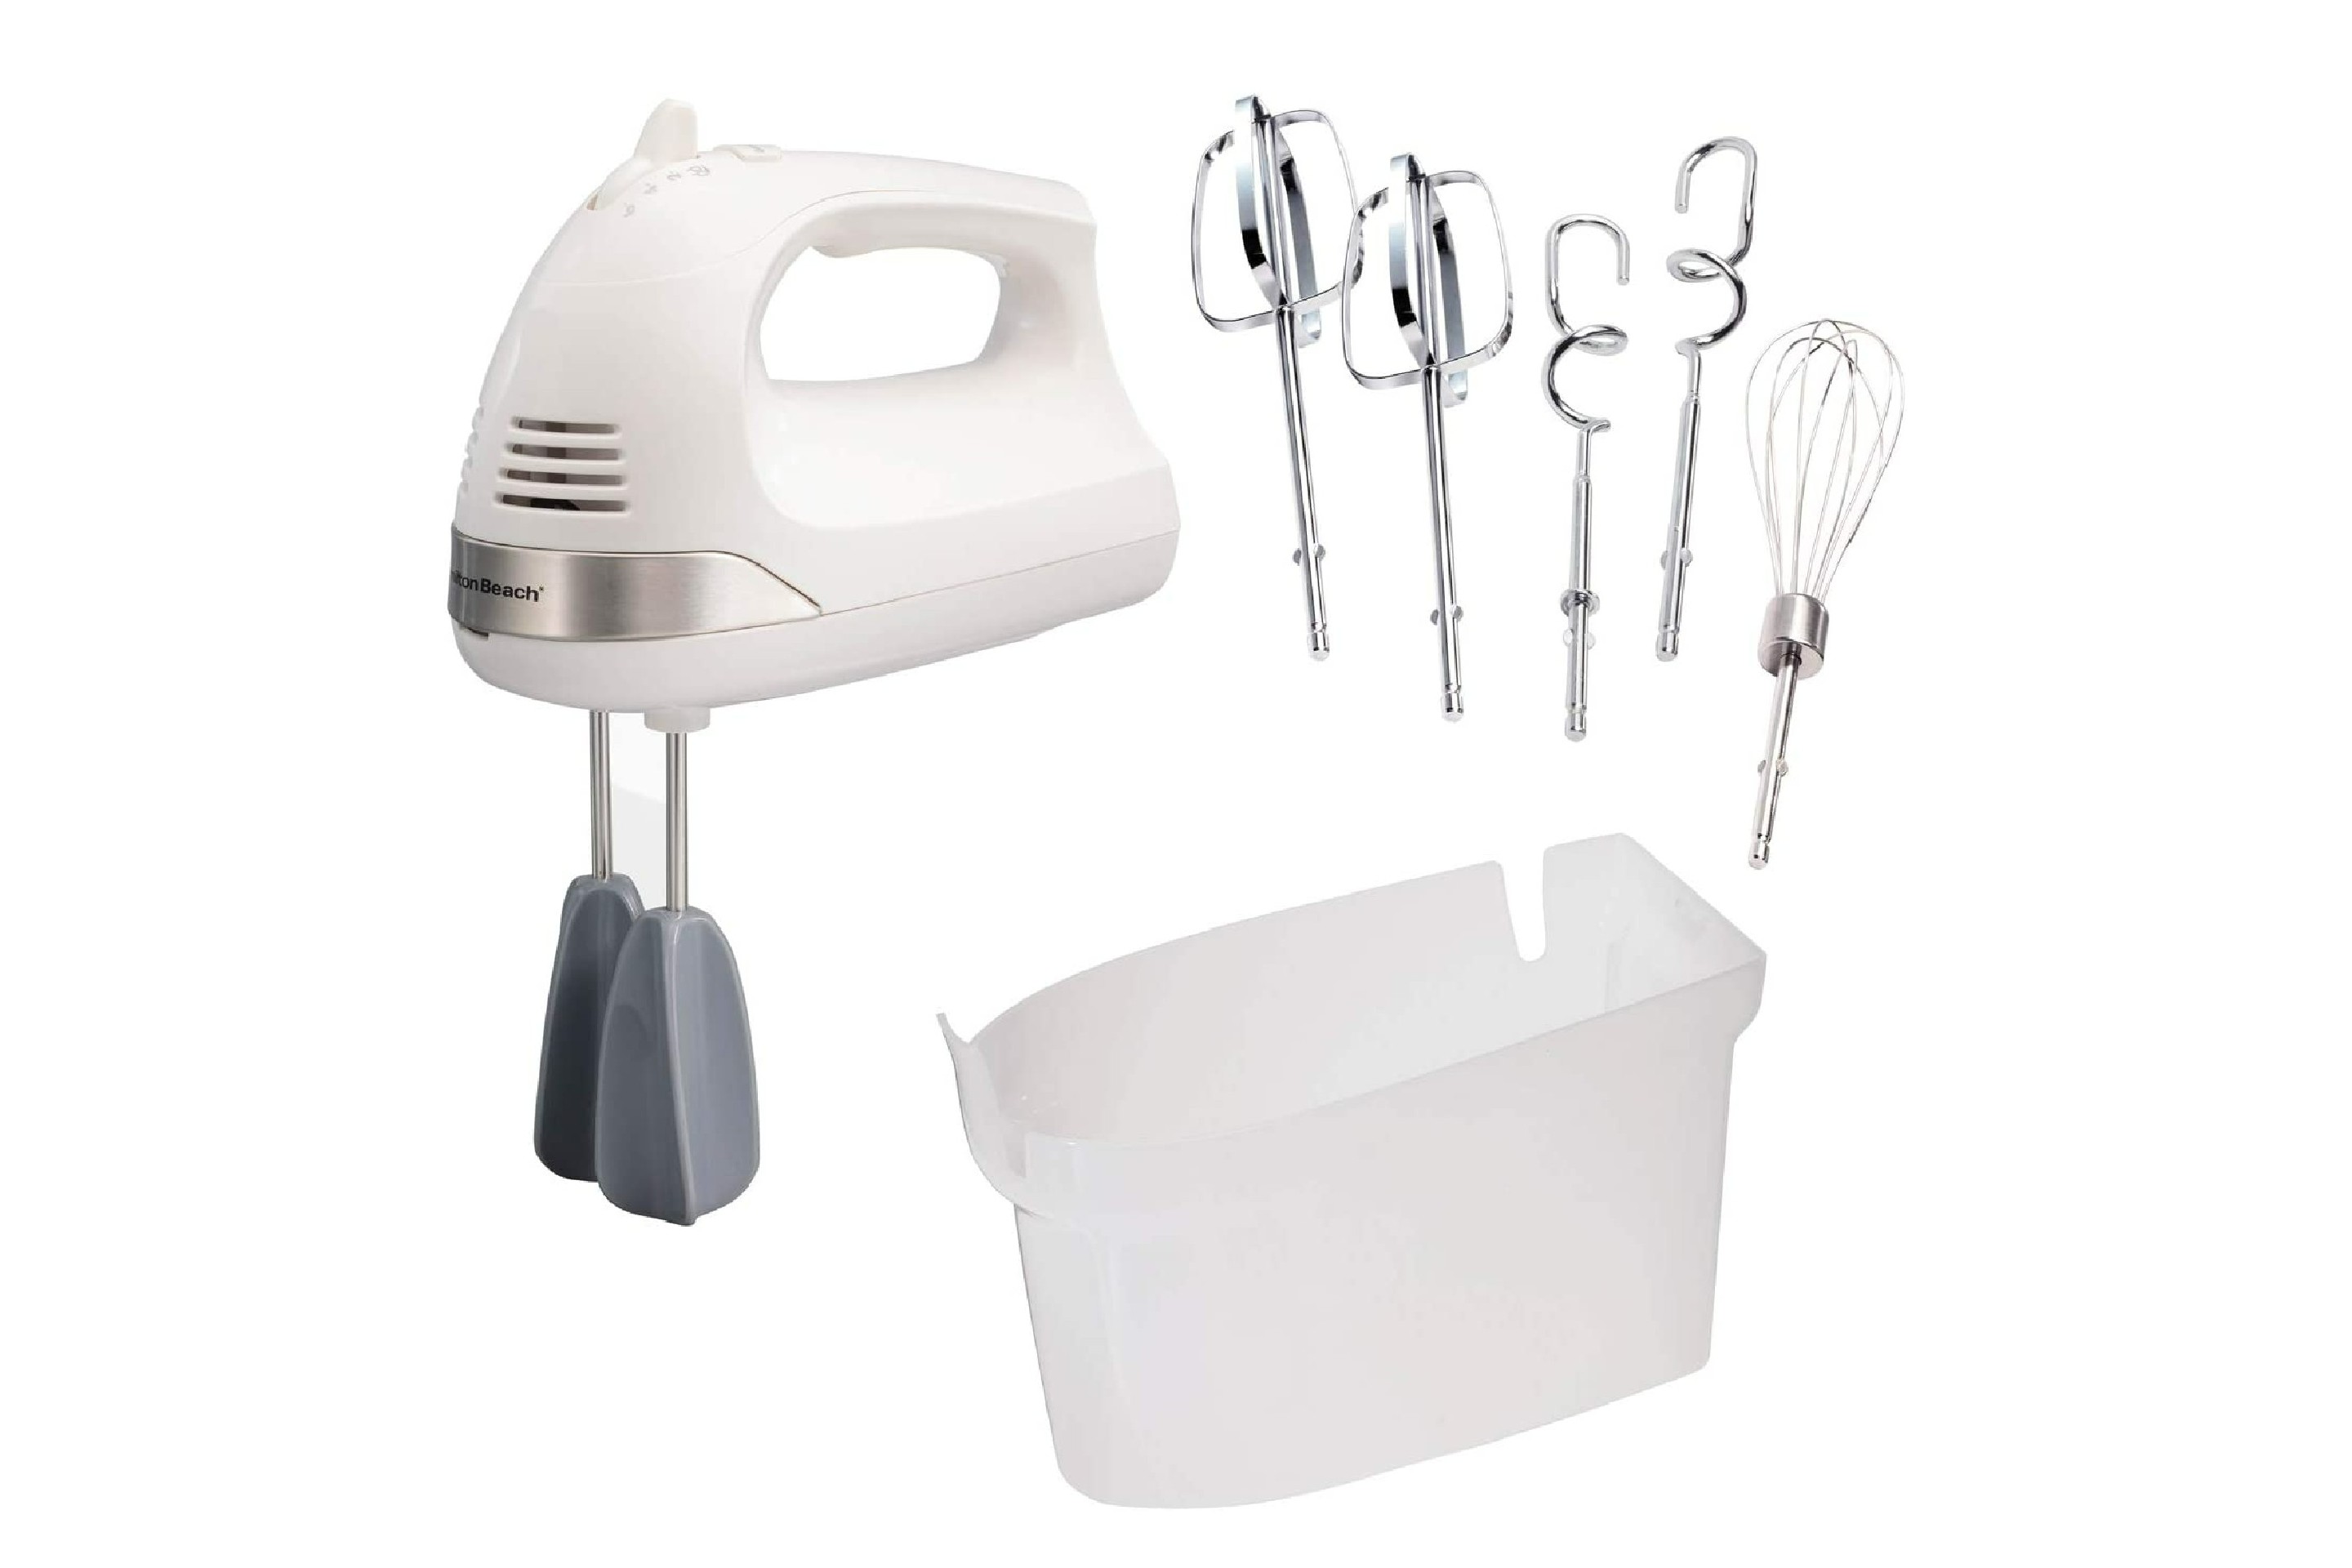 Professional Electric Mixer HandHeld Mixers Beaters Whisks